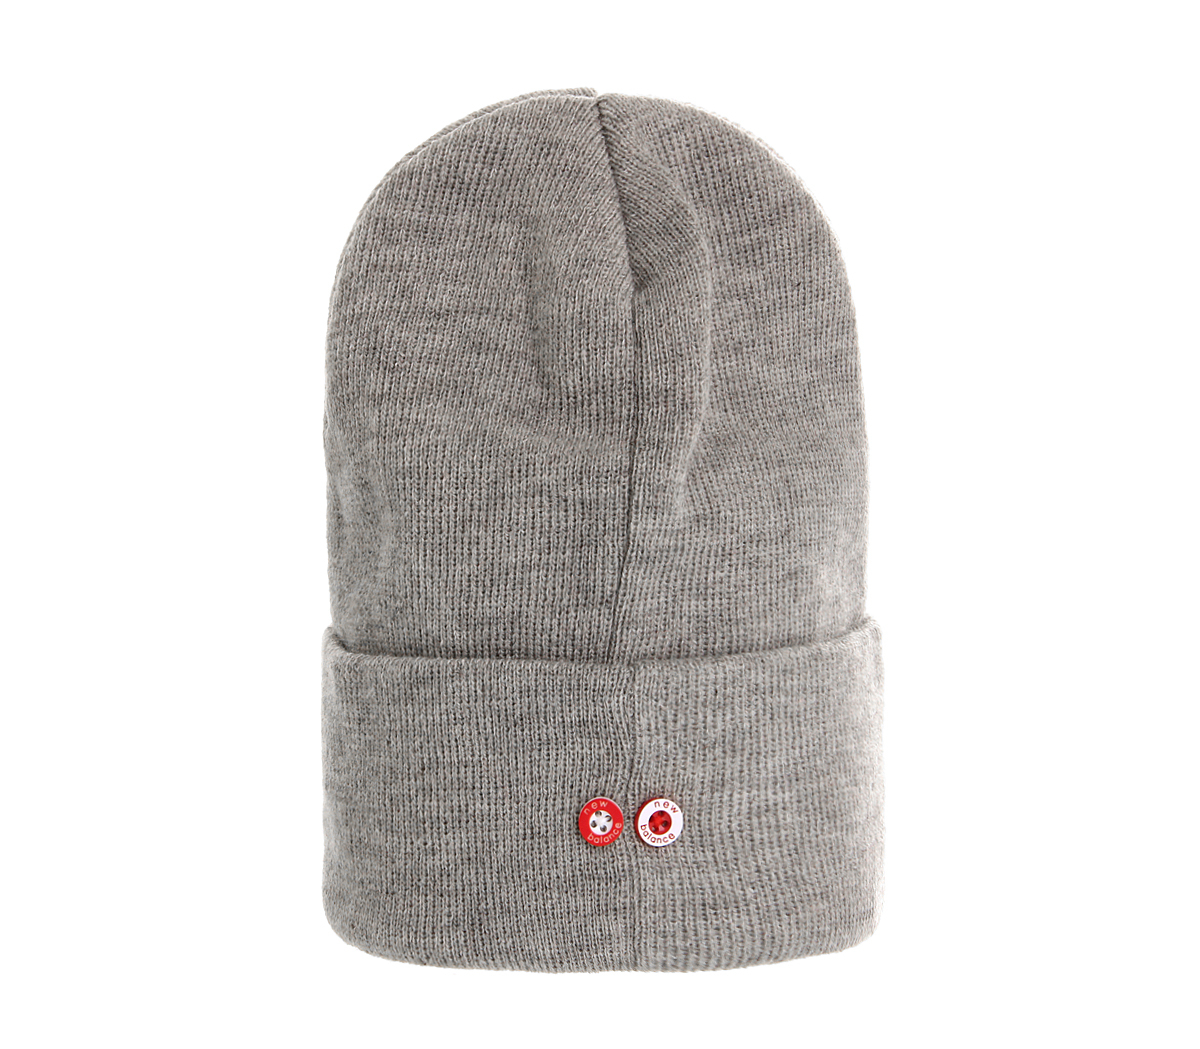 New Balance Troy Beanie Hat in Gray for Men - Lyst